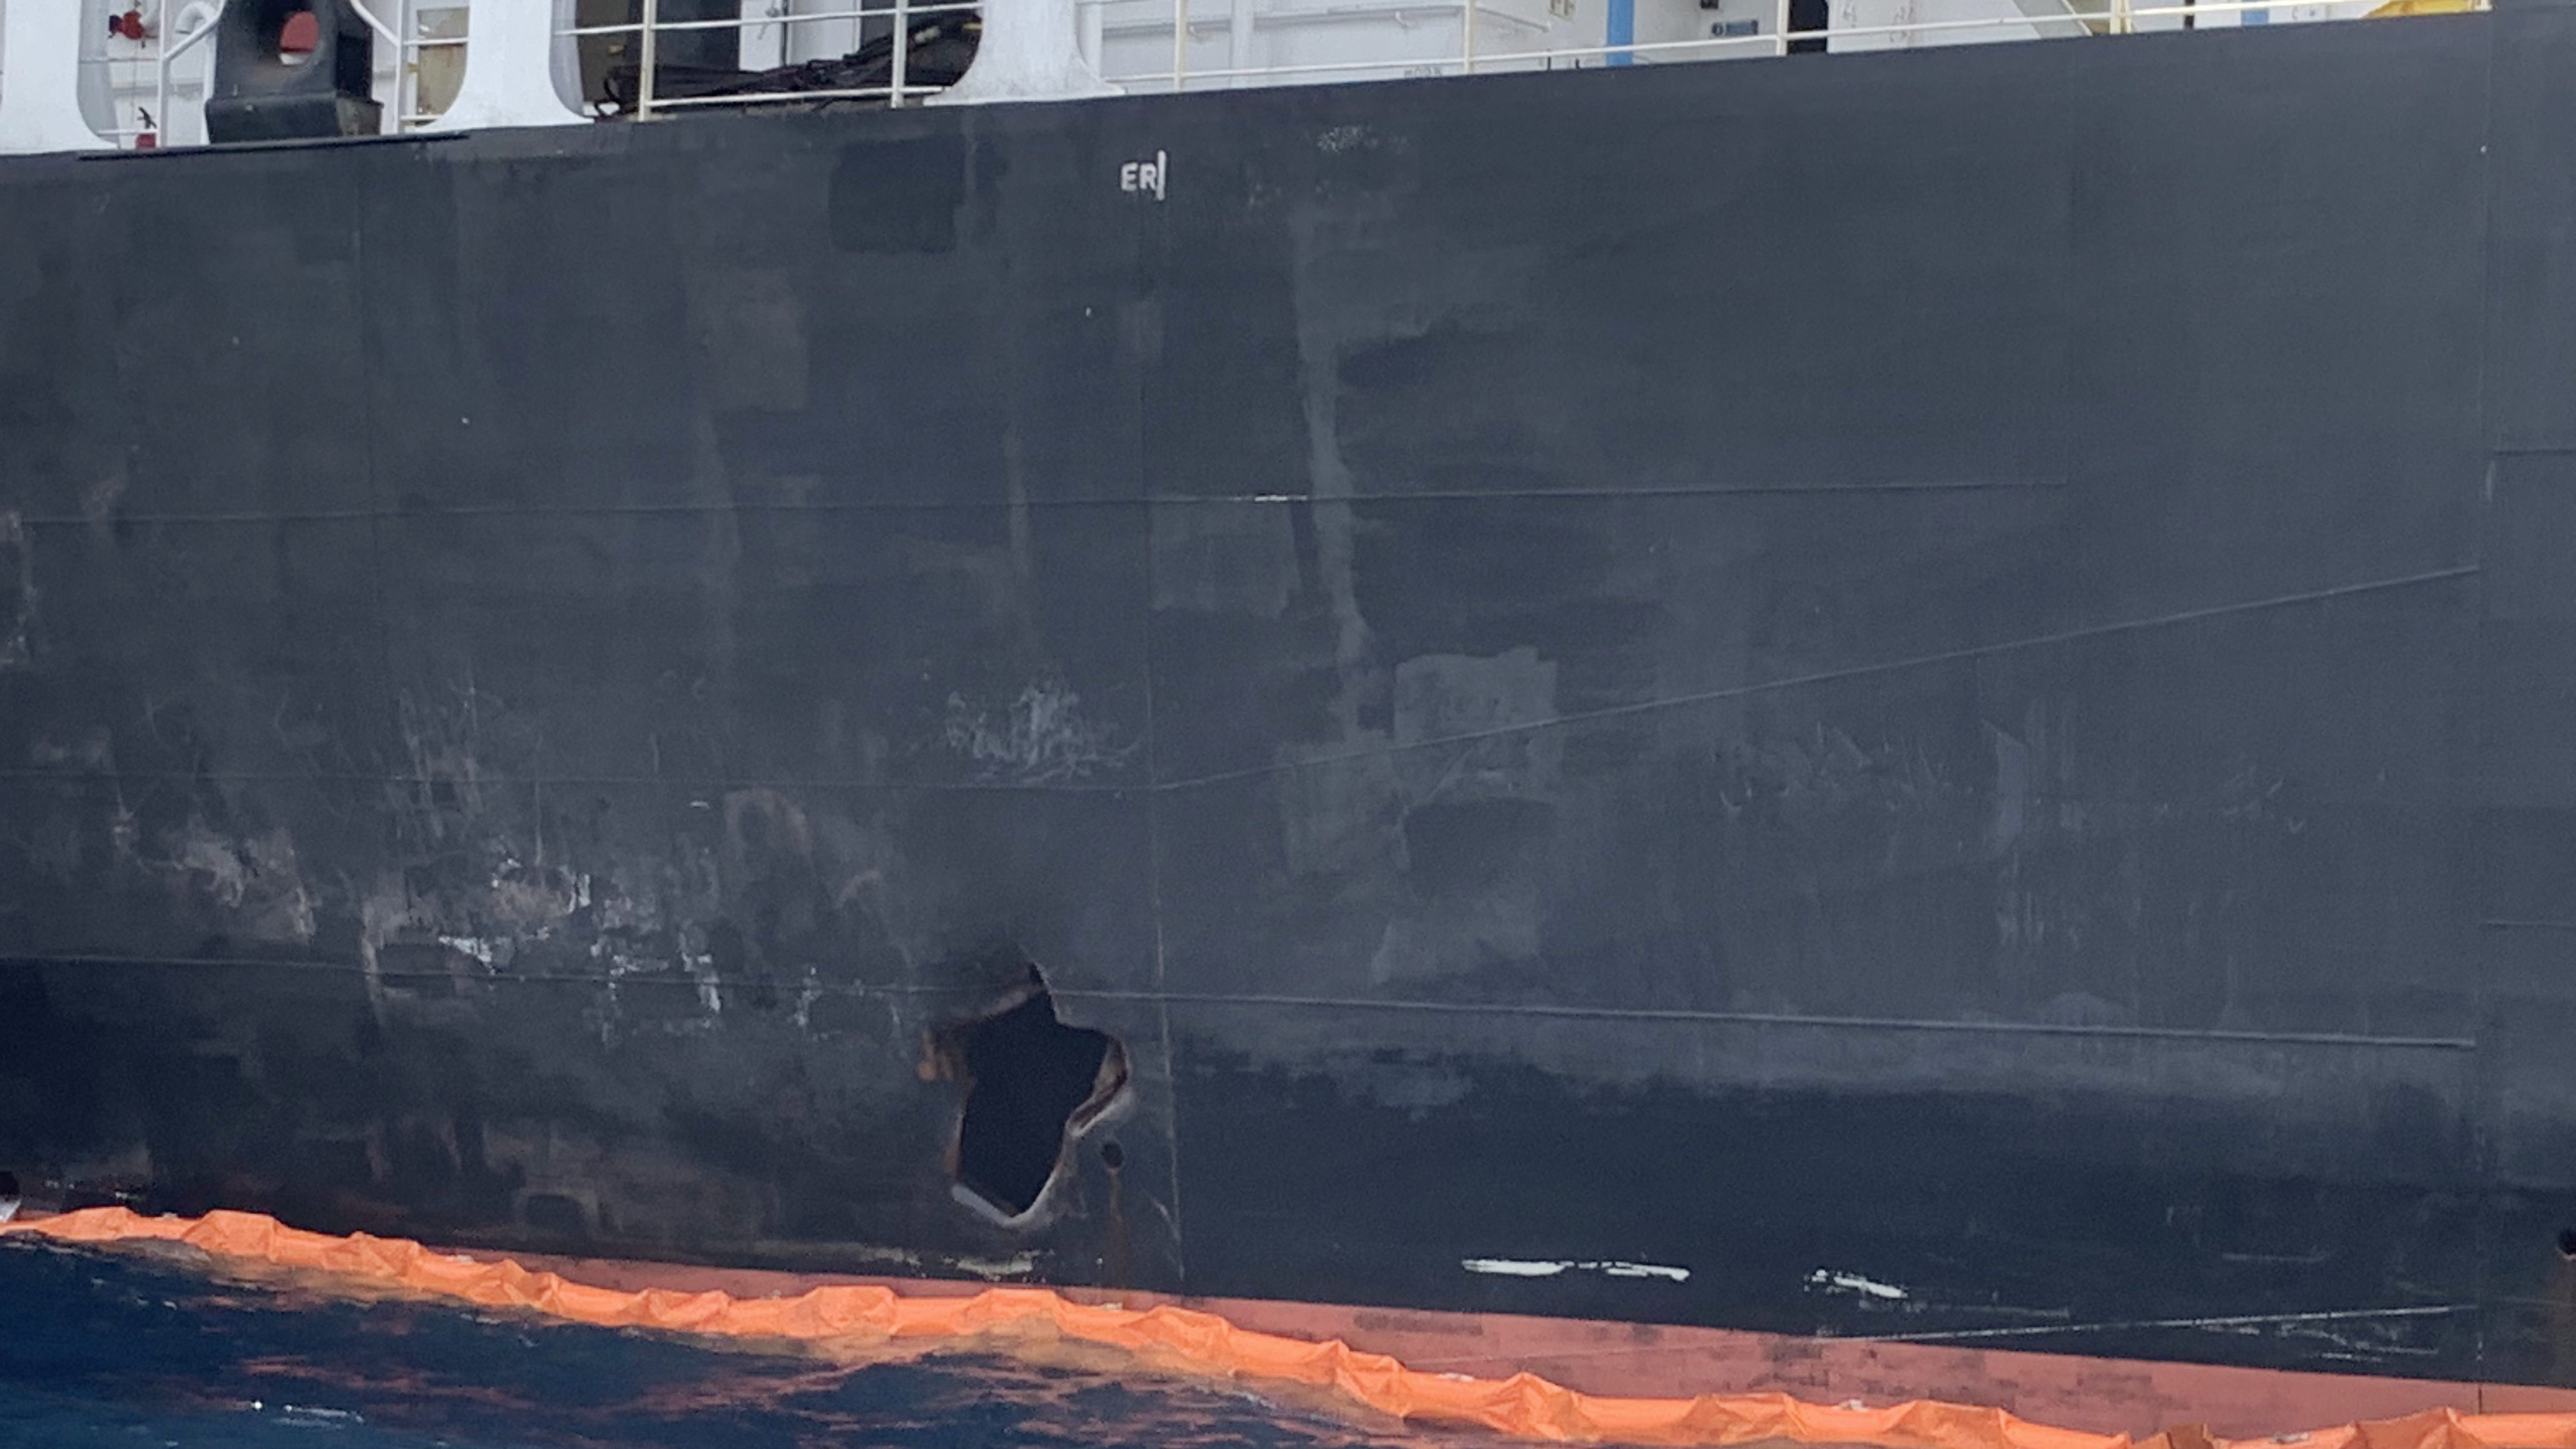 UAE Says Better Evidence Needed to Assign Blame for Tanker Attacks